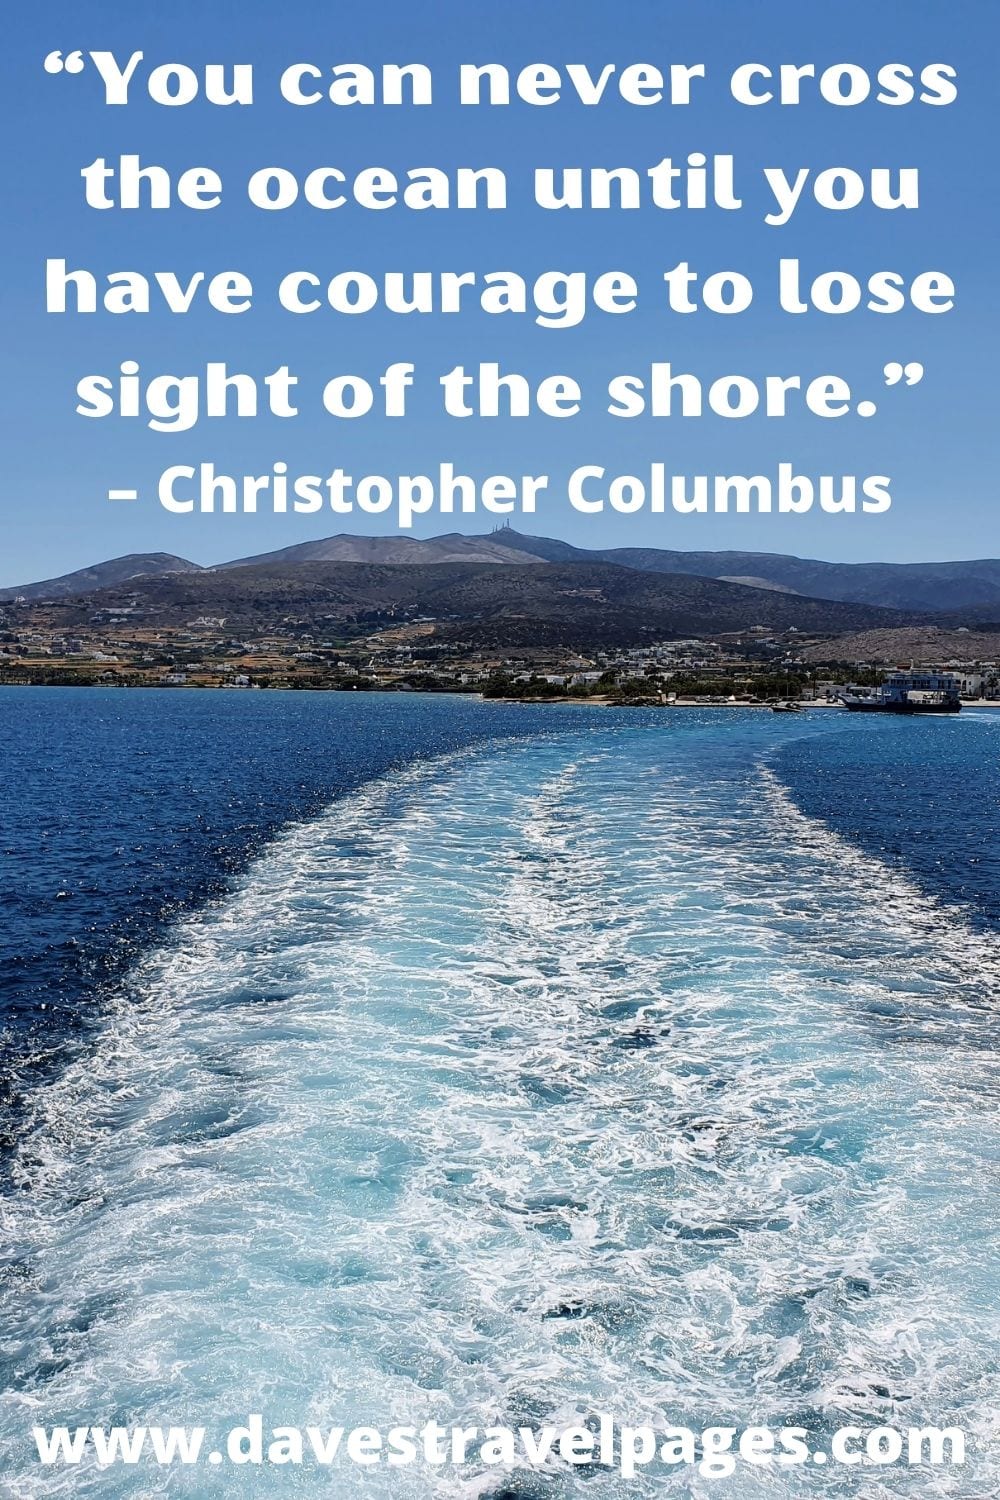 “You can never cross the ocean until you have courage to lose sight of the shore.” – Christopher Columbus